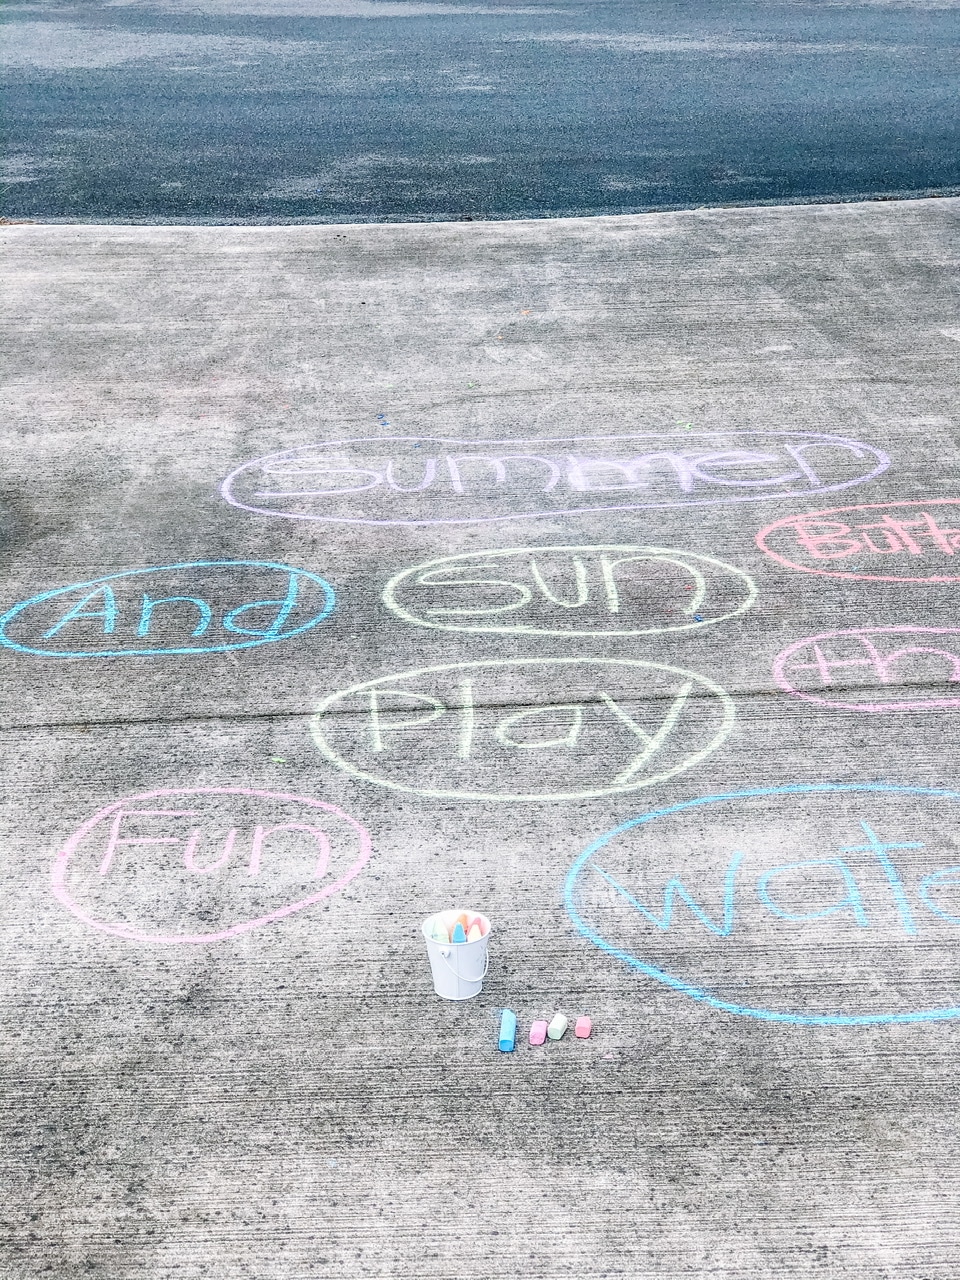 water balloon sight word game